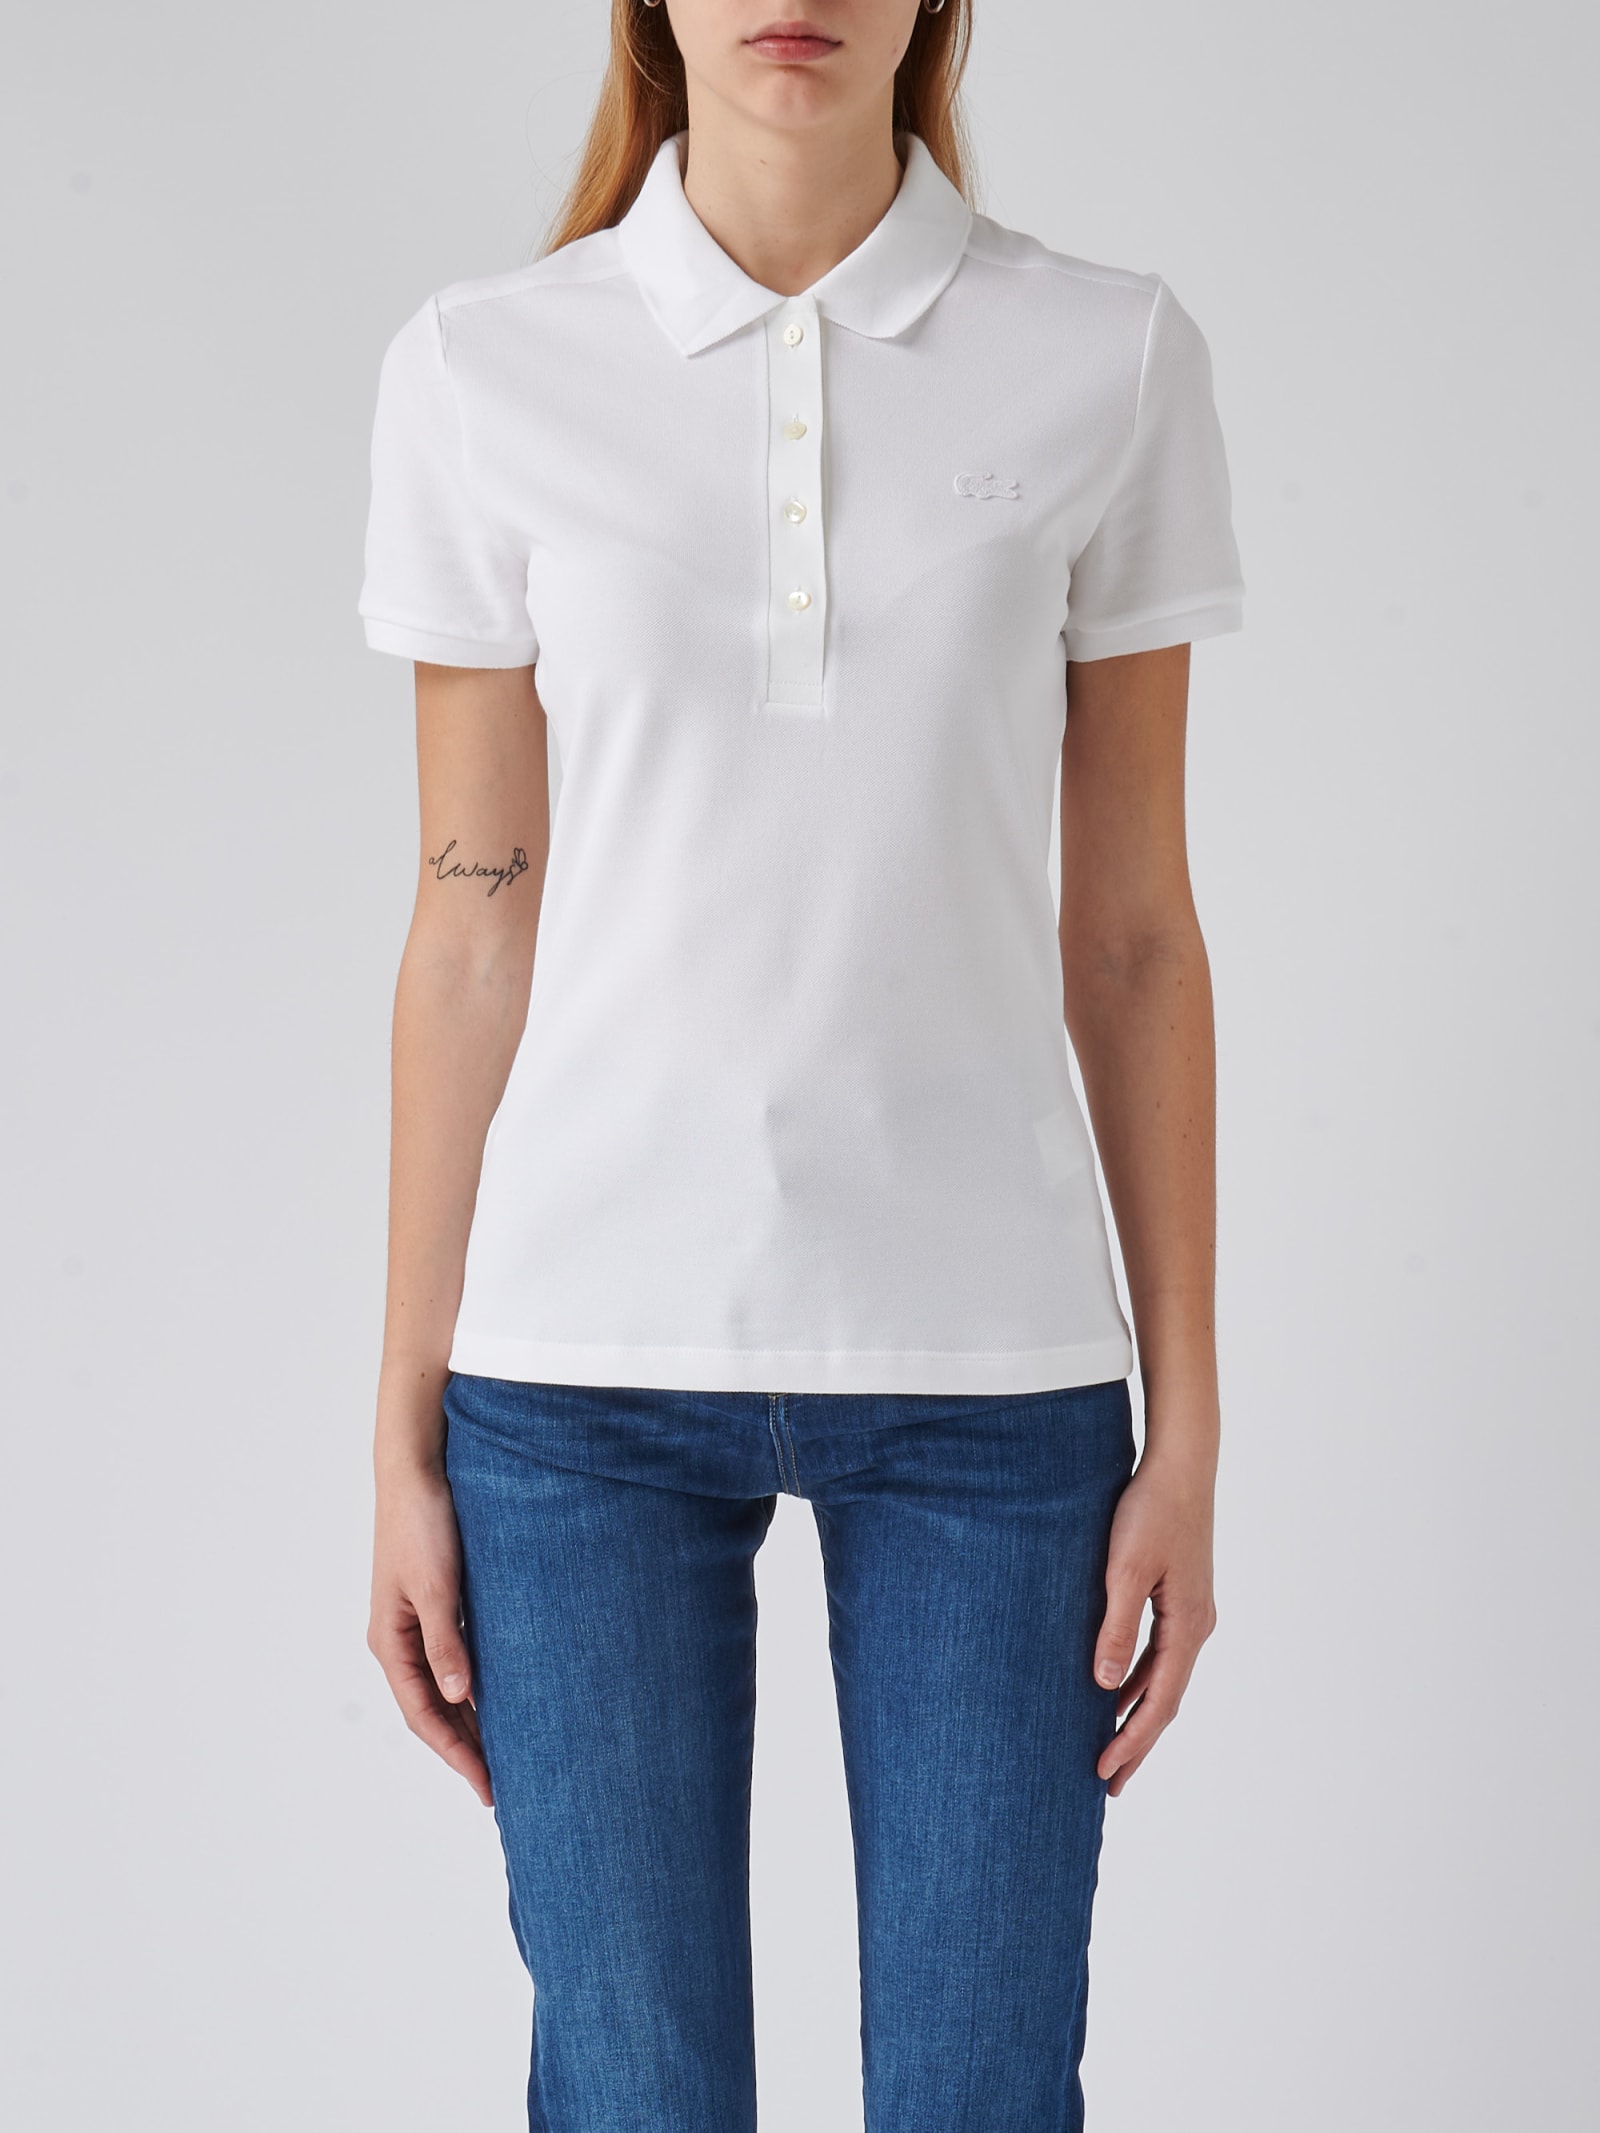 Lacoste Cotton T-shirt In Bianco